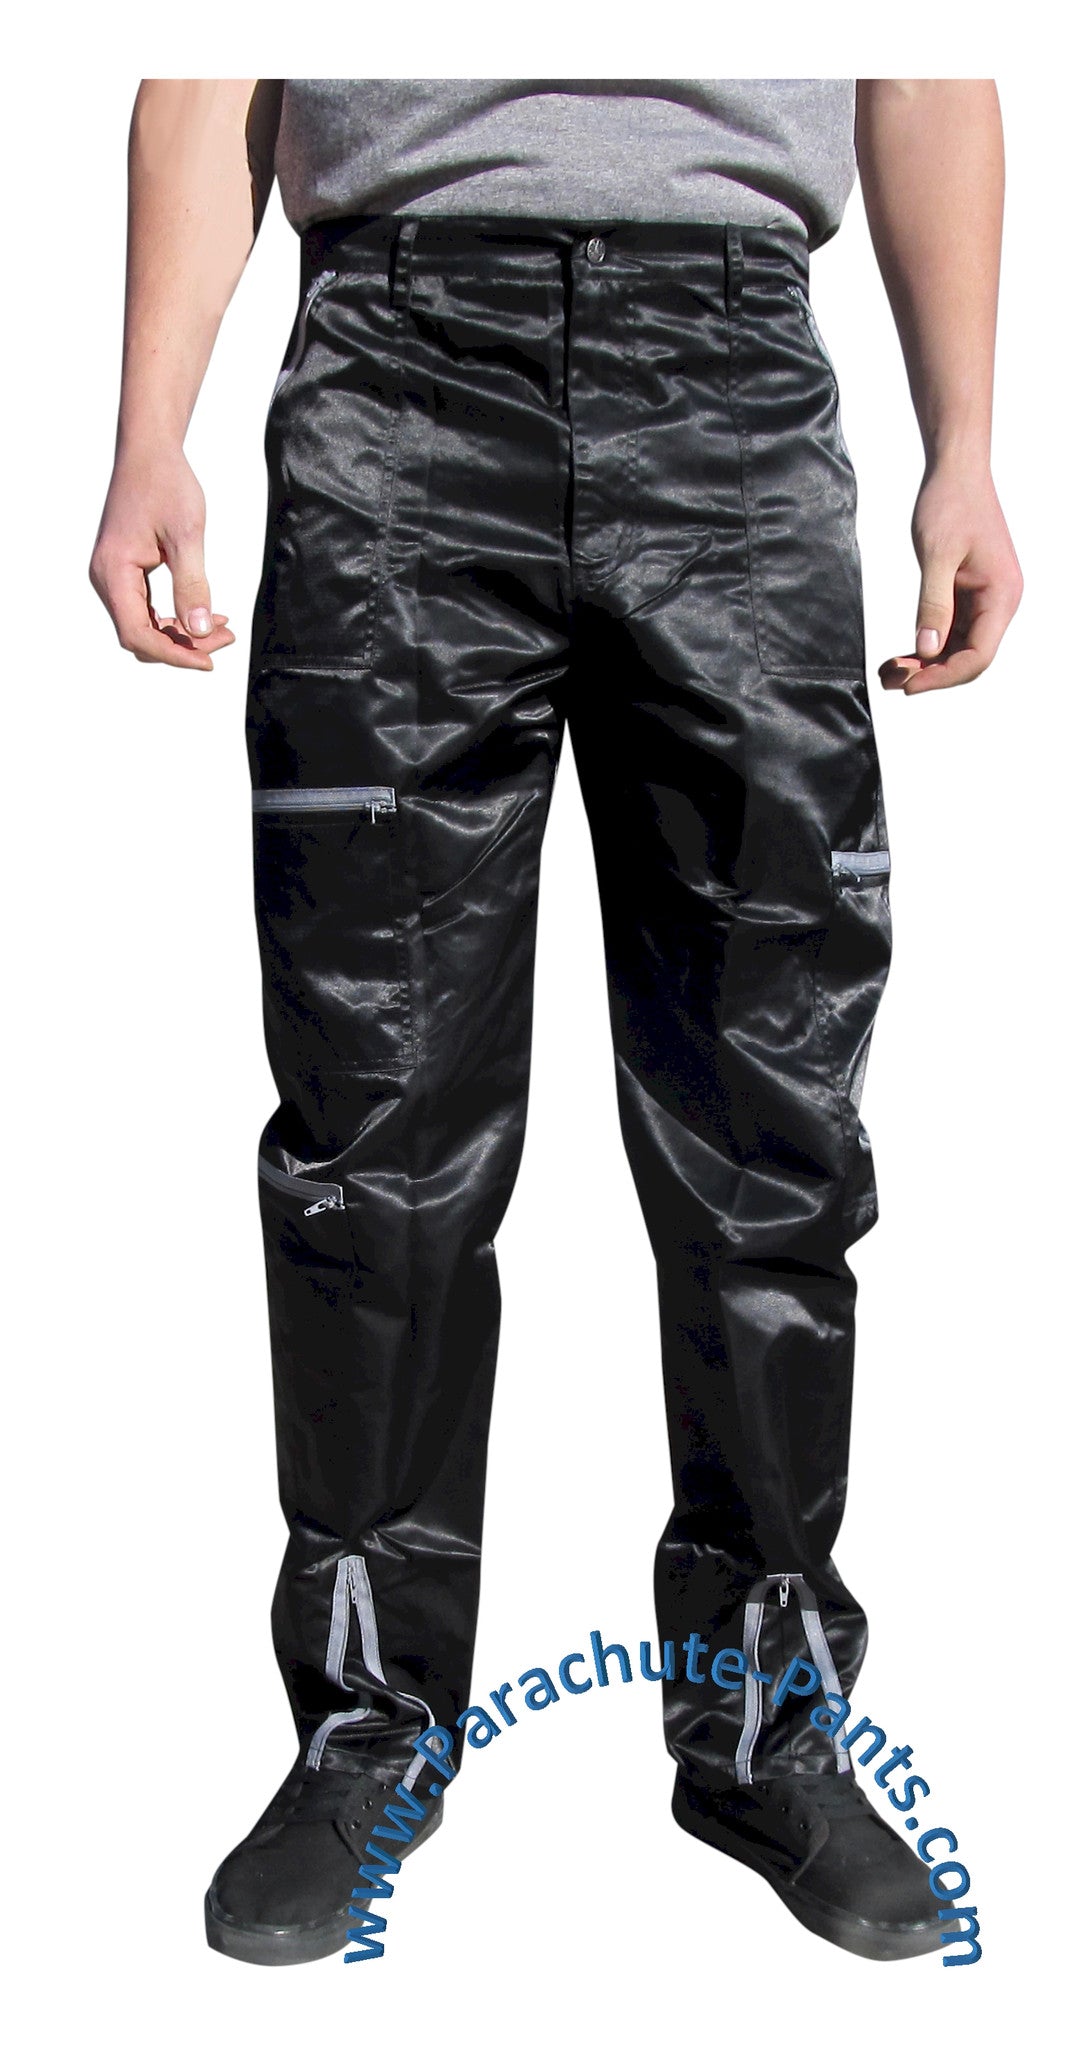 Panno D'Or Black Nylon Parachute Pants with Grey Zippers | The